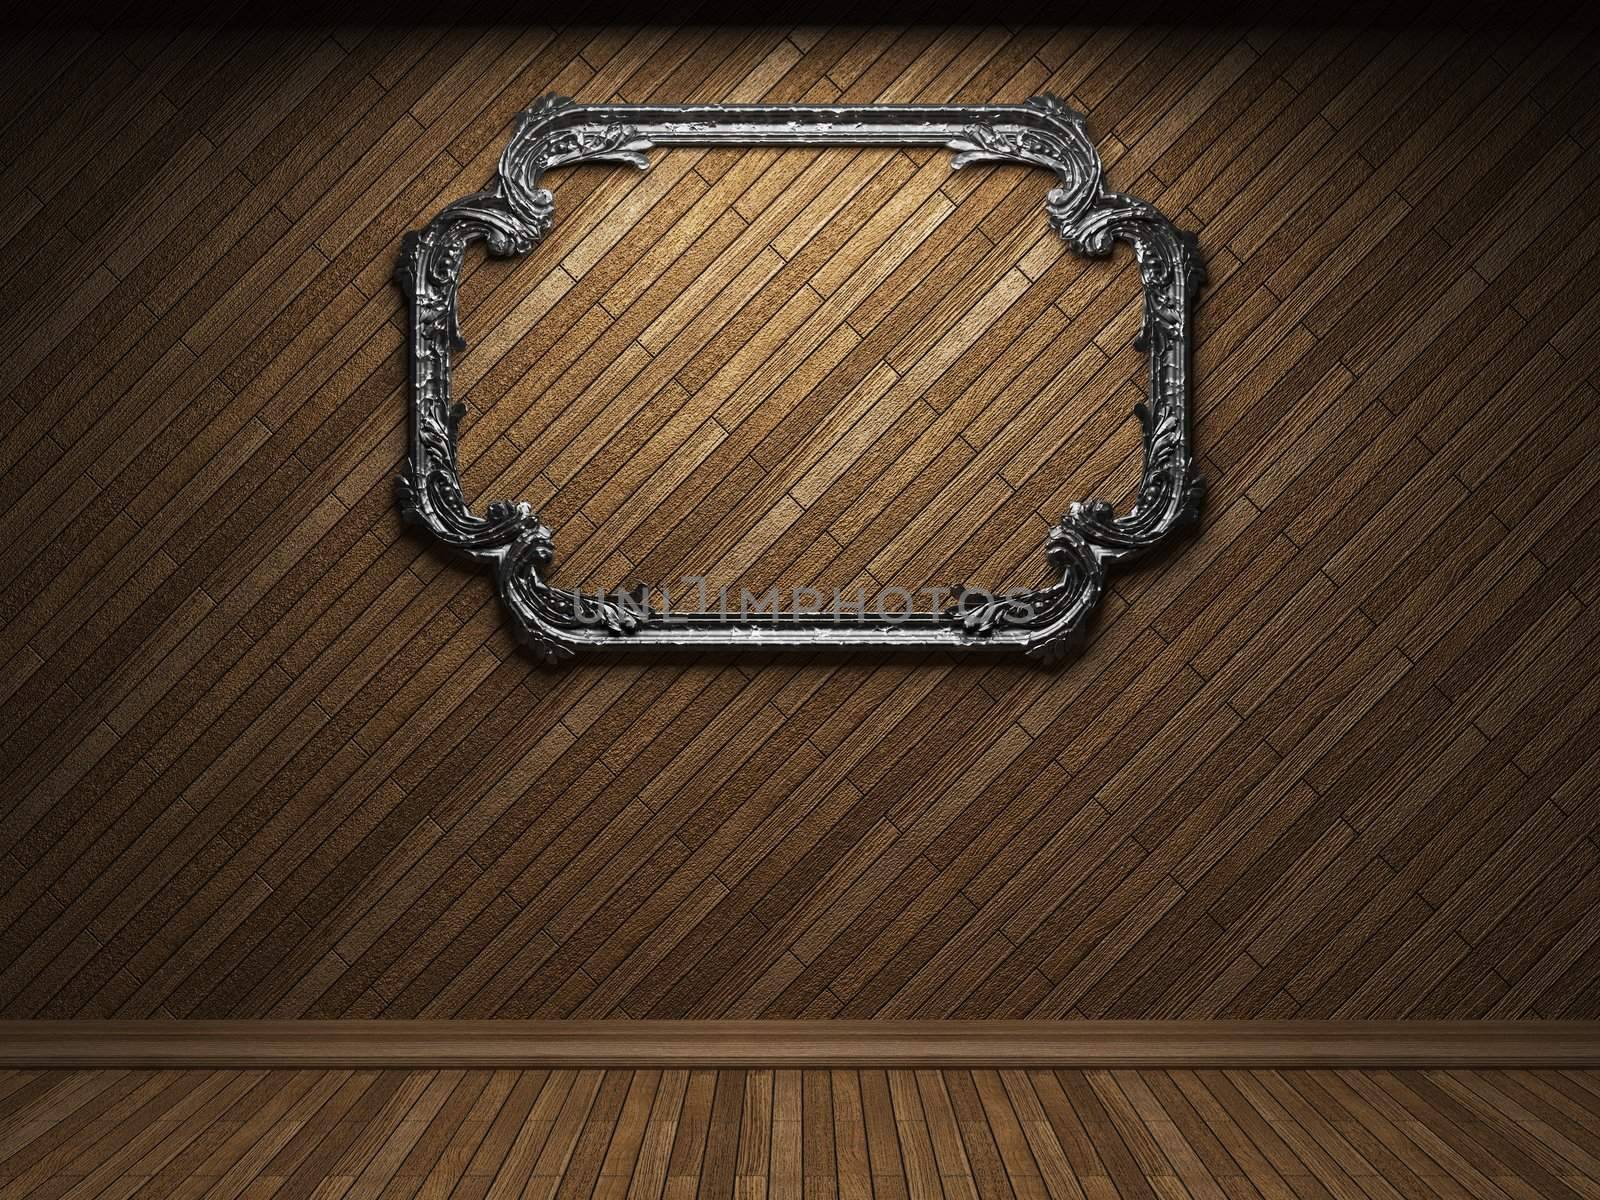 illuminated wooden wall and frame made in 3D